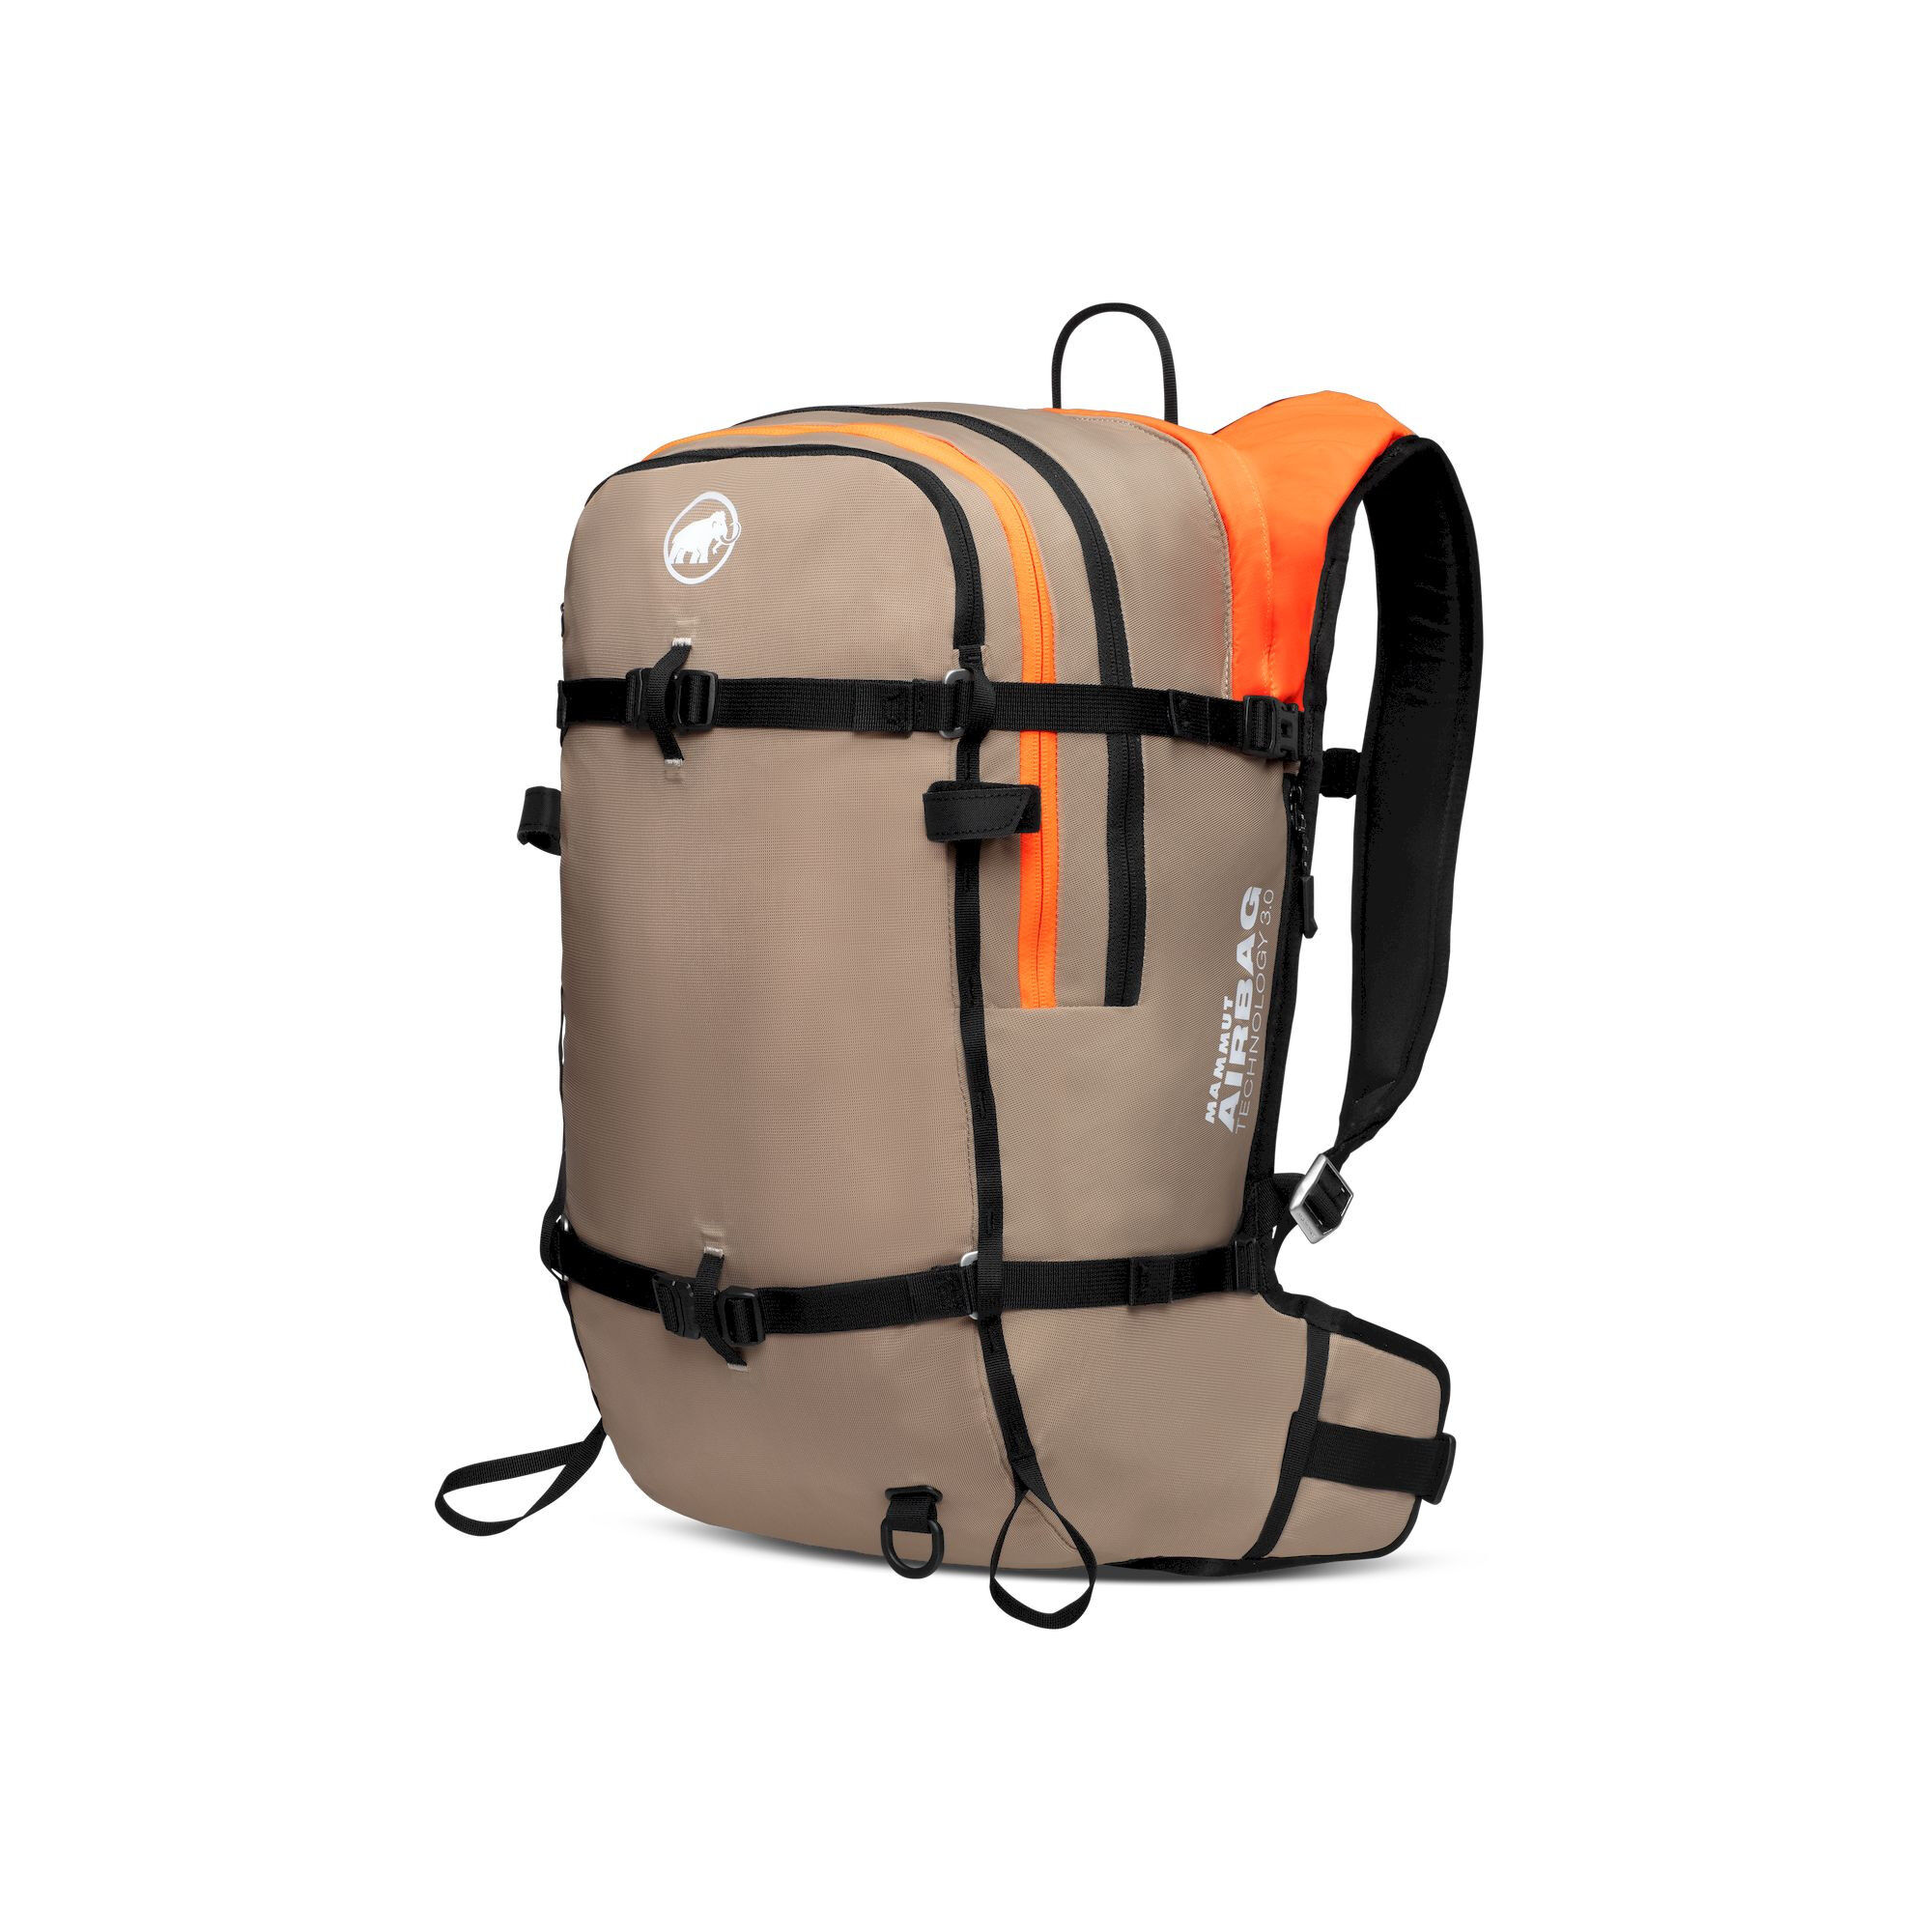 Mammut Free 28 Removable Airbag 3.0 - Avalanche airbag backpack